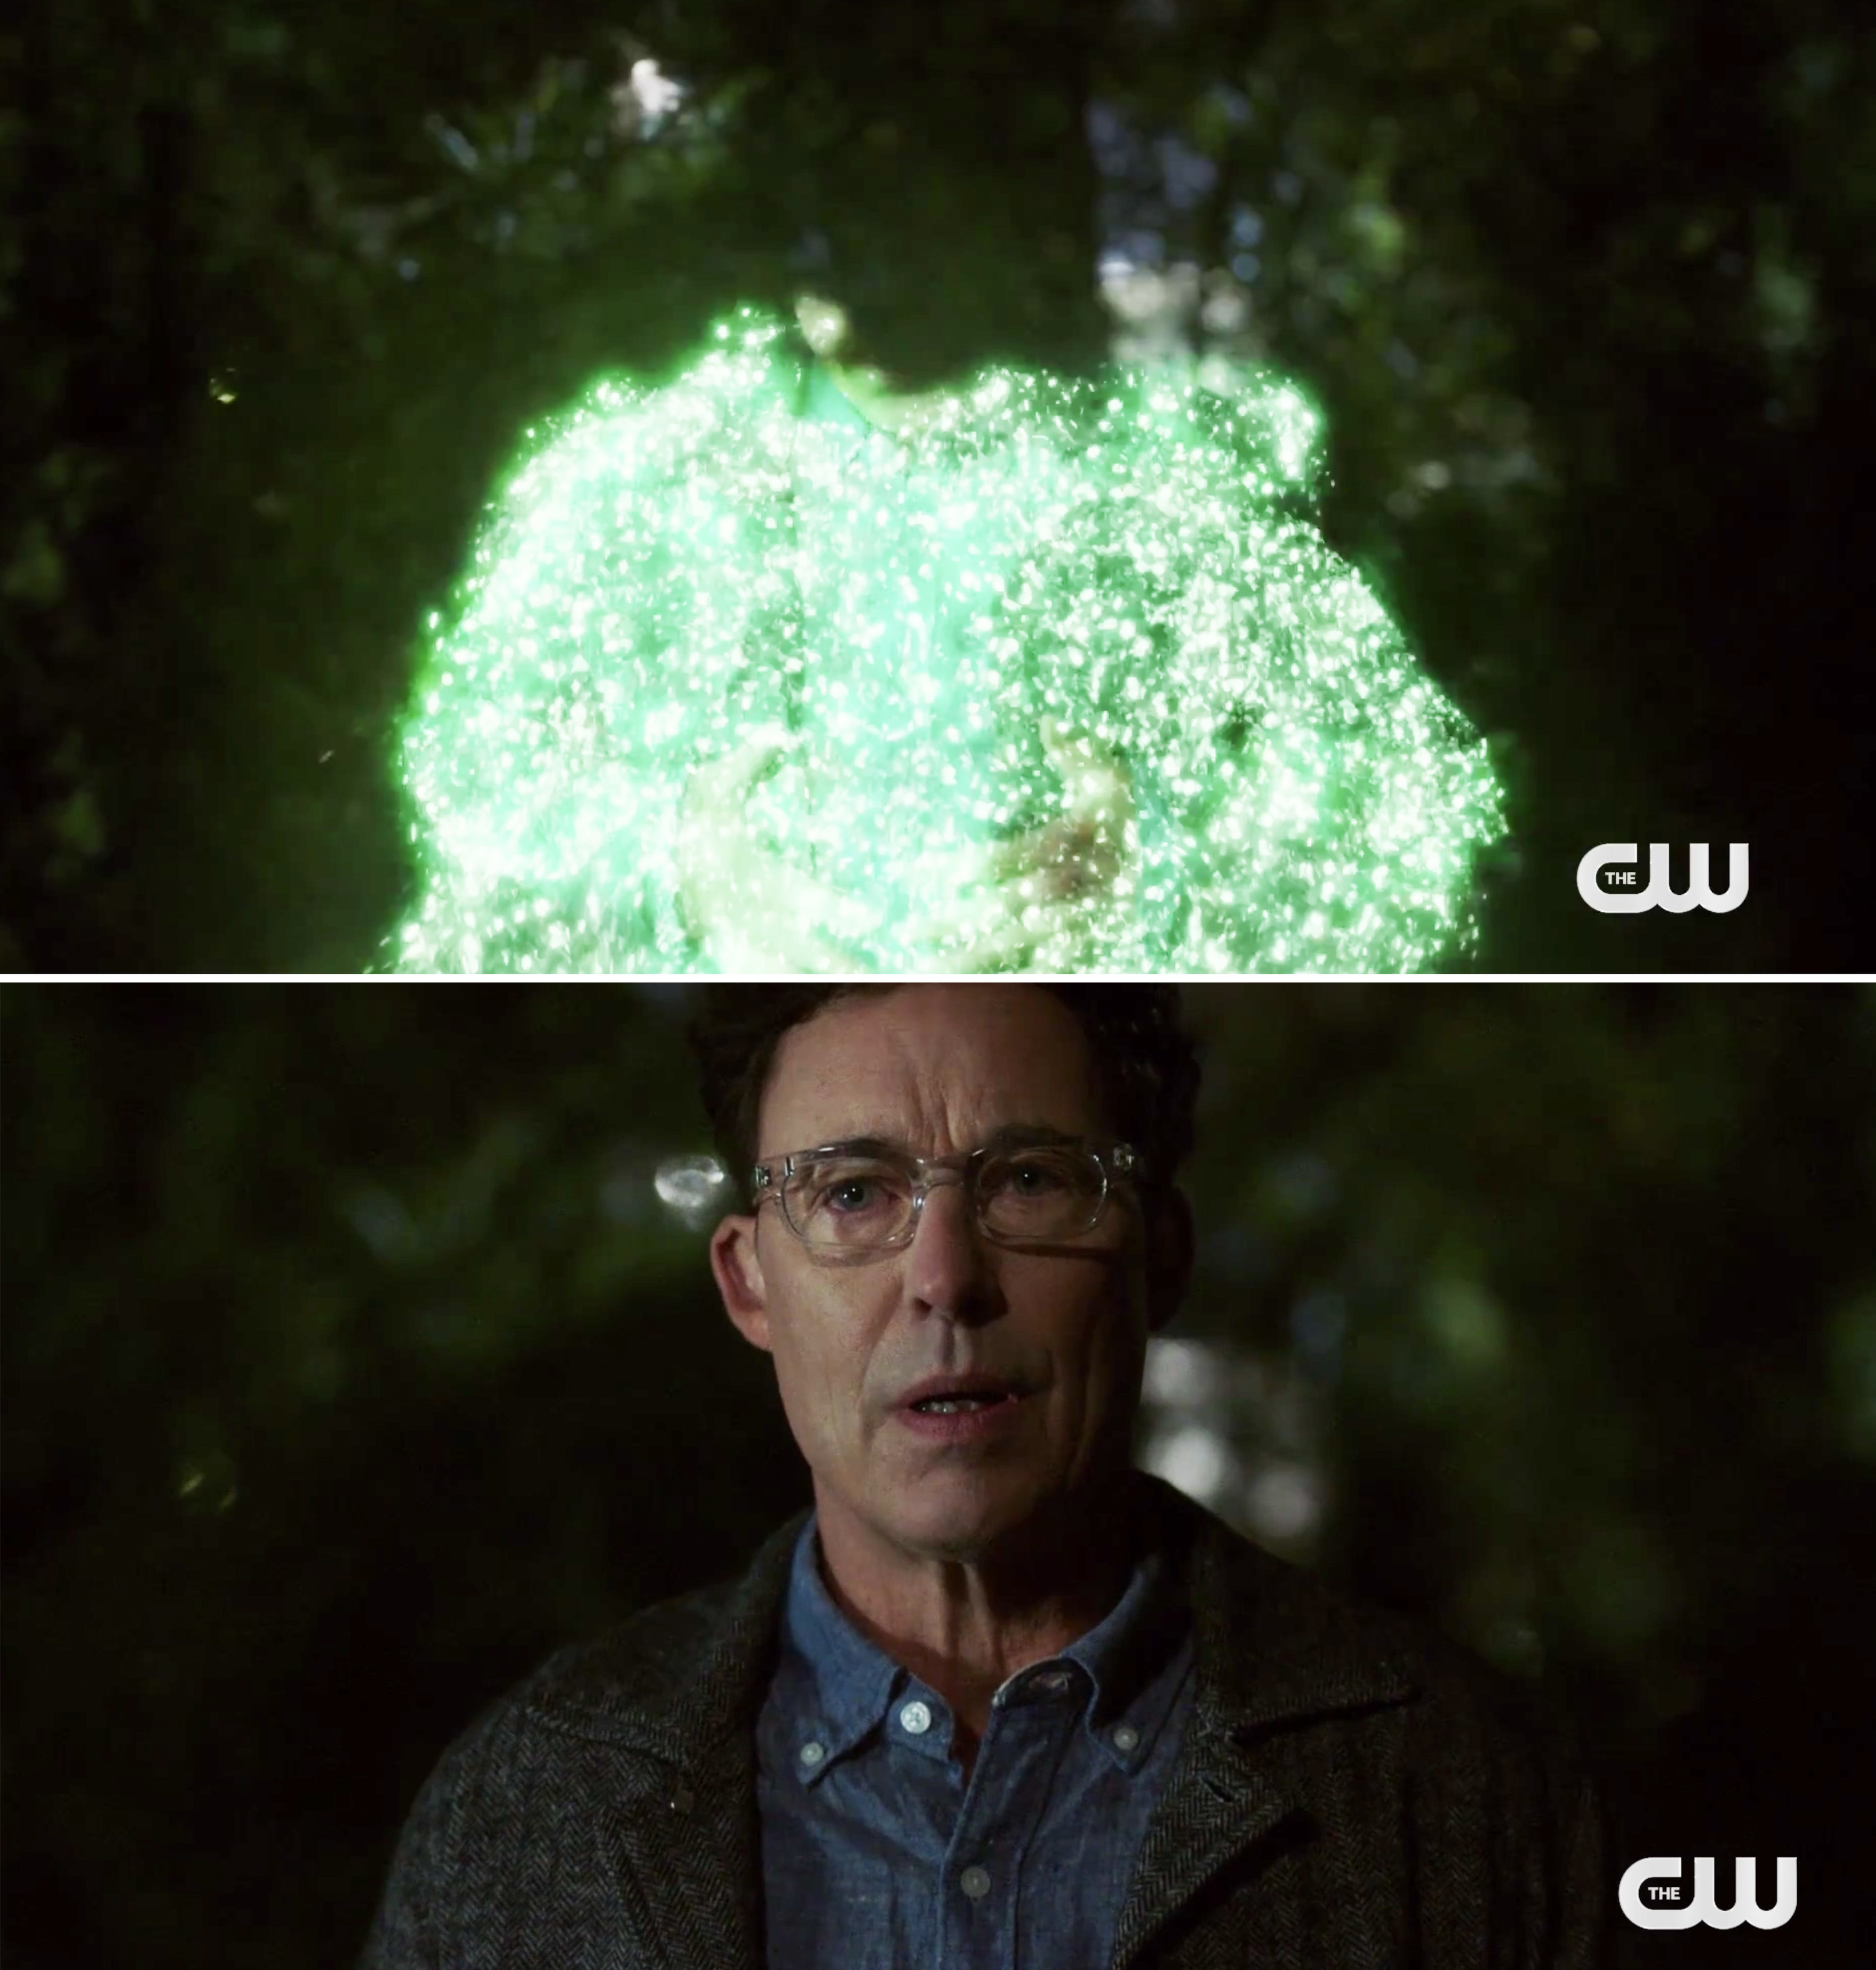 Harrison Wells reappearing out of some green particles 